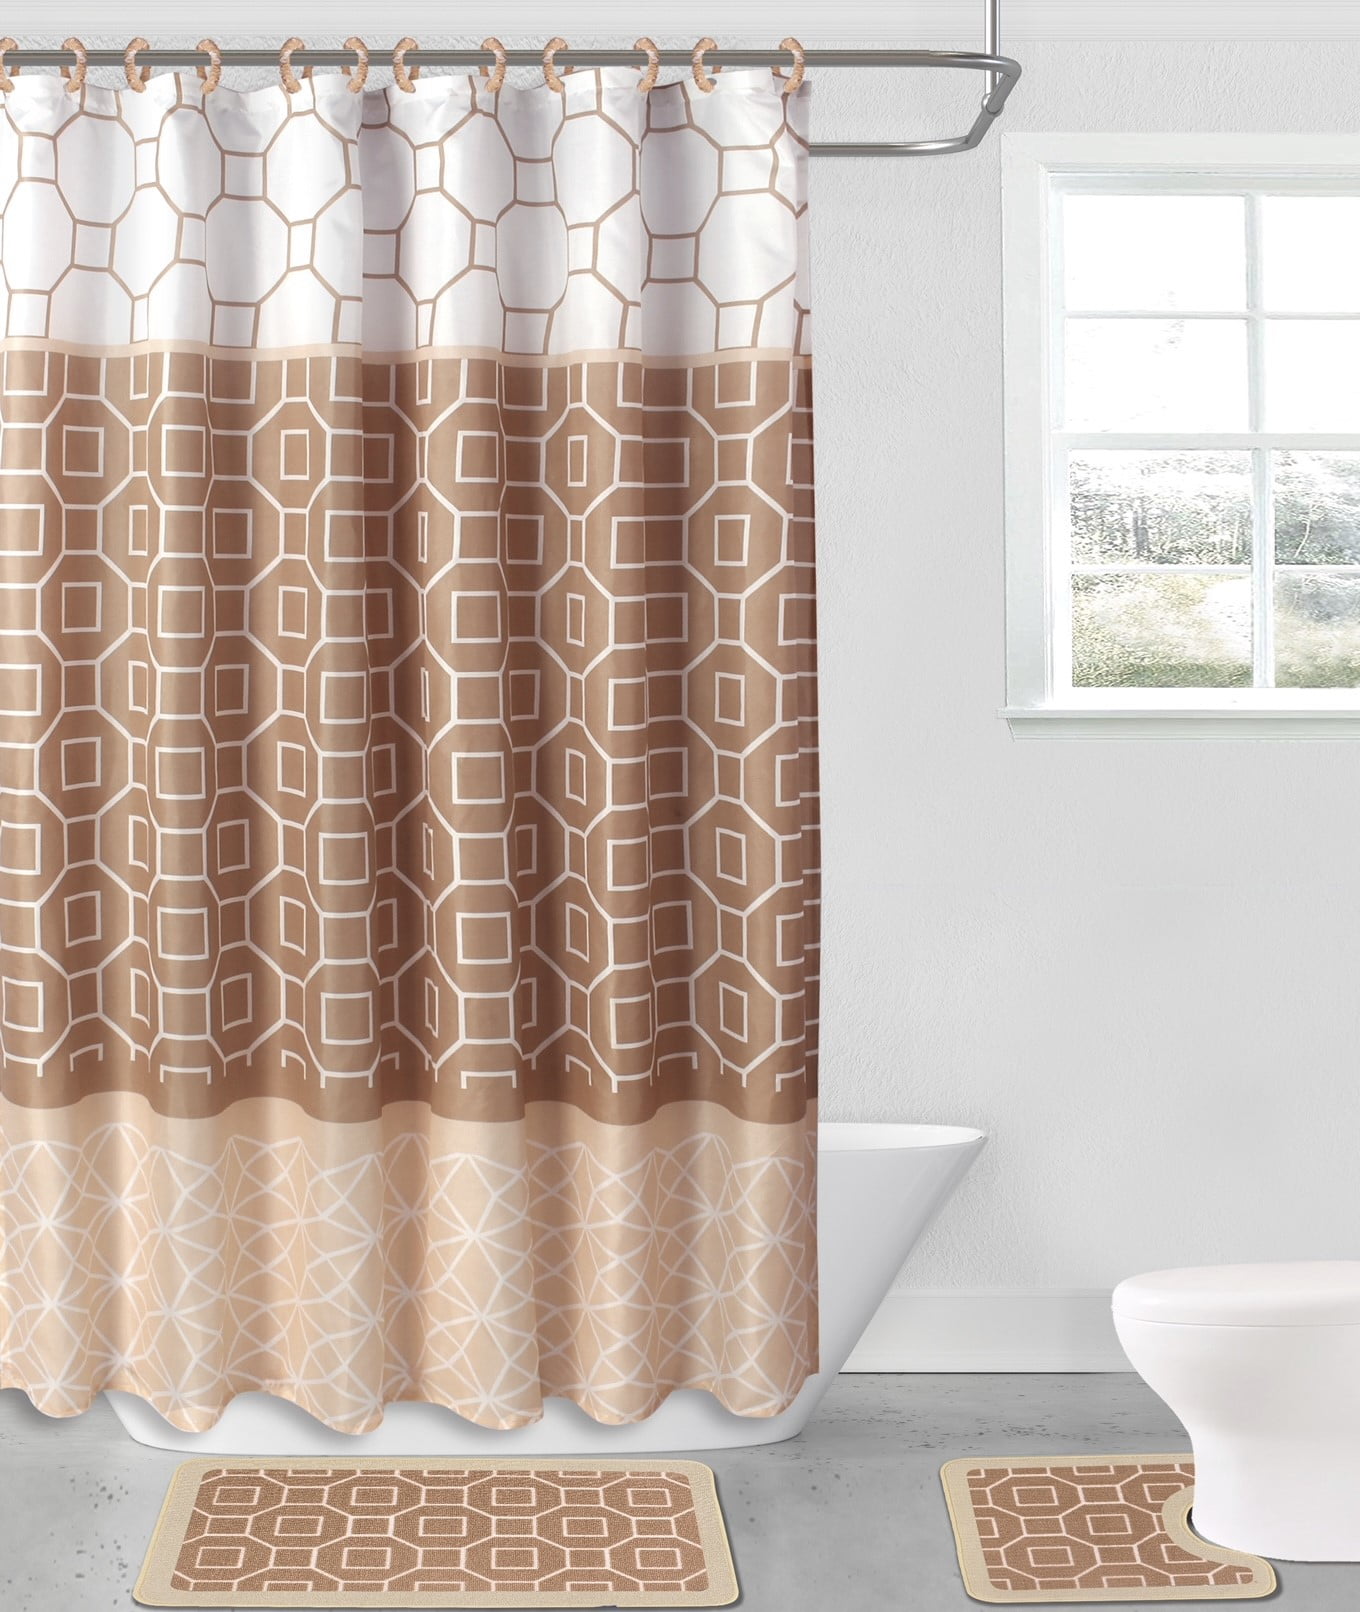 Details about   Modern Glass Windows and Vases Fabric Shower Curtain Bathroom Waterproof & Hooks 